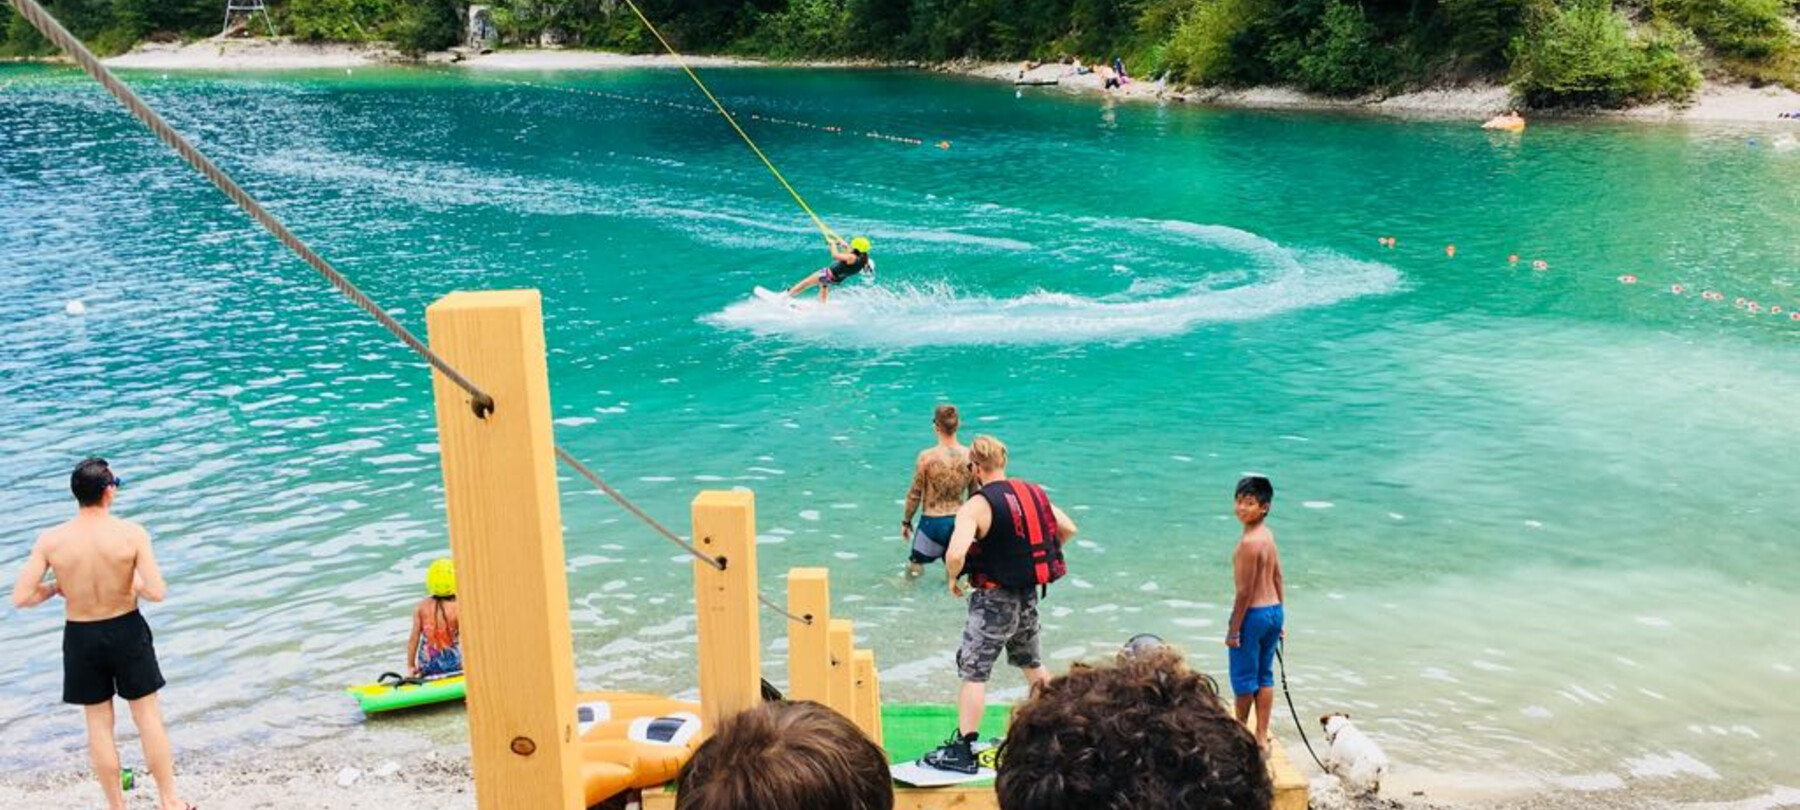 The lakes in Trentino: The history of wakeboarding on Lake Ledro